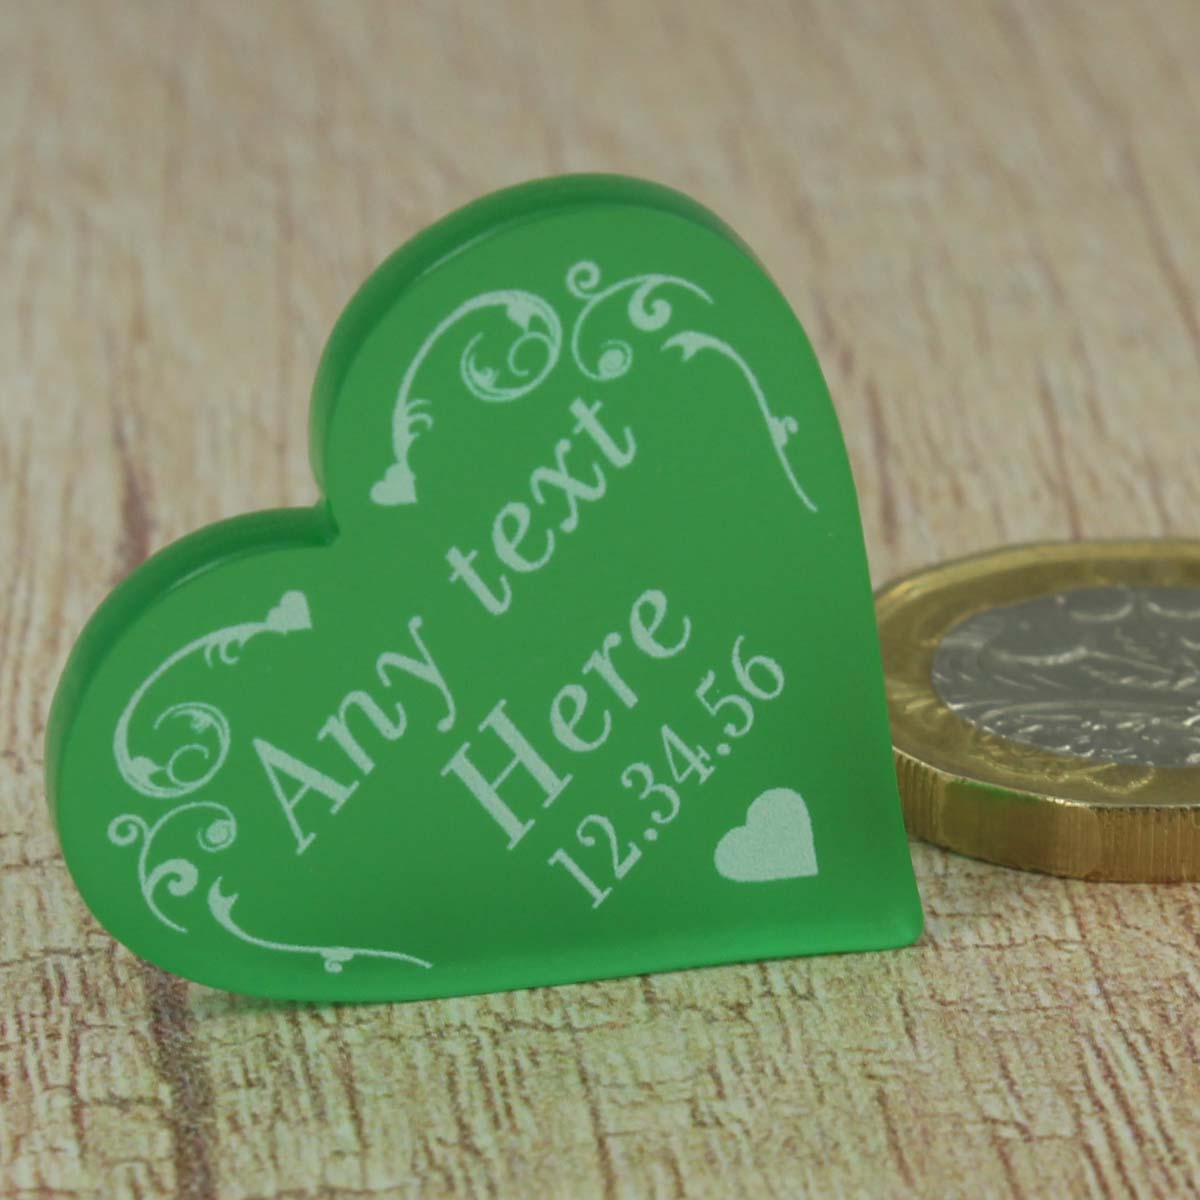 Personalised Wedding Favours - Frosted Green Acrylic Swirl Love Hearts